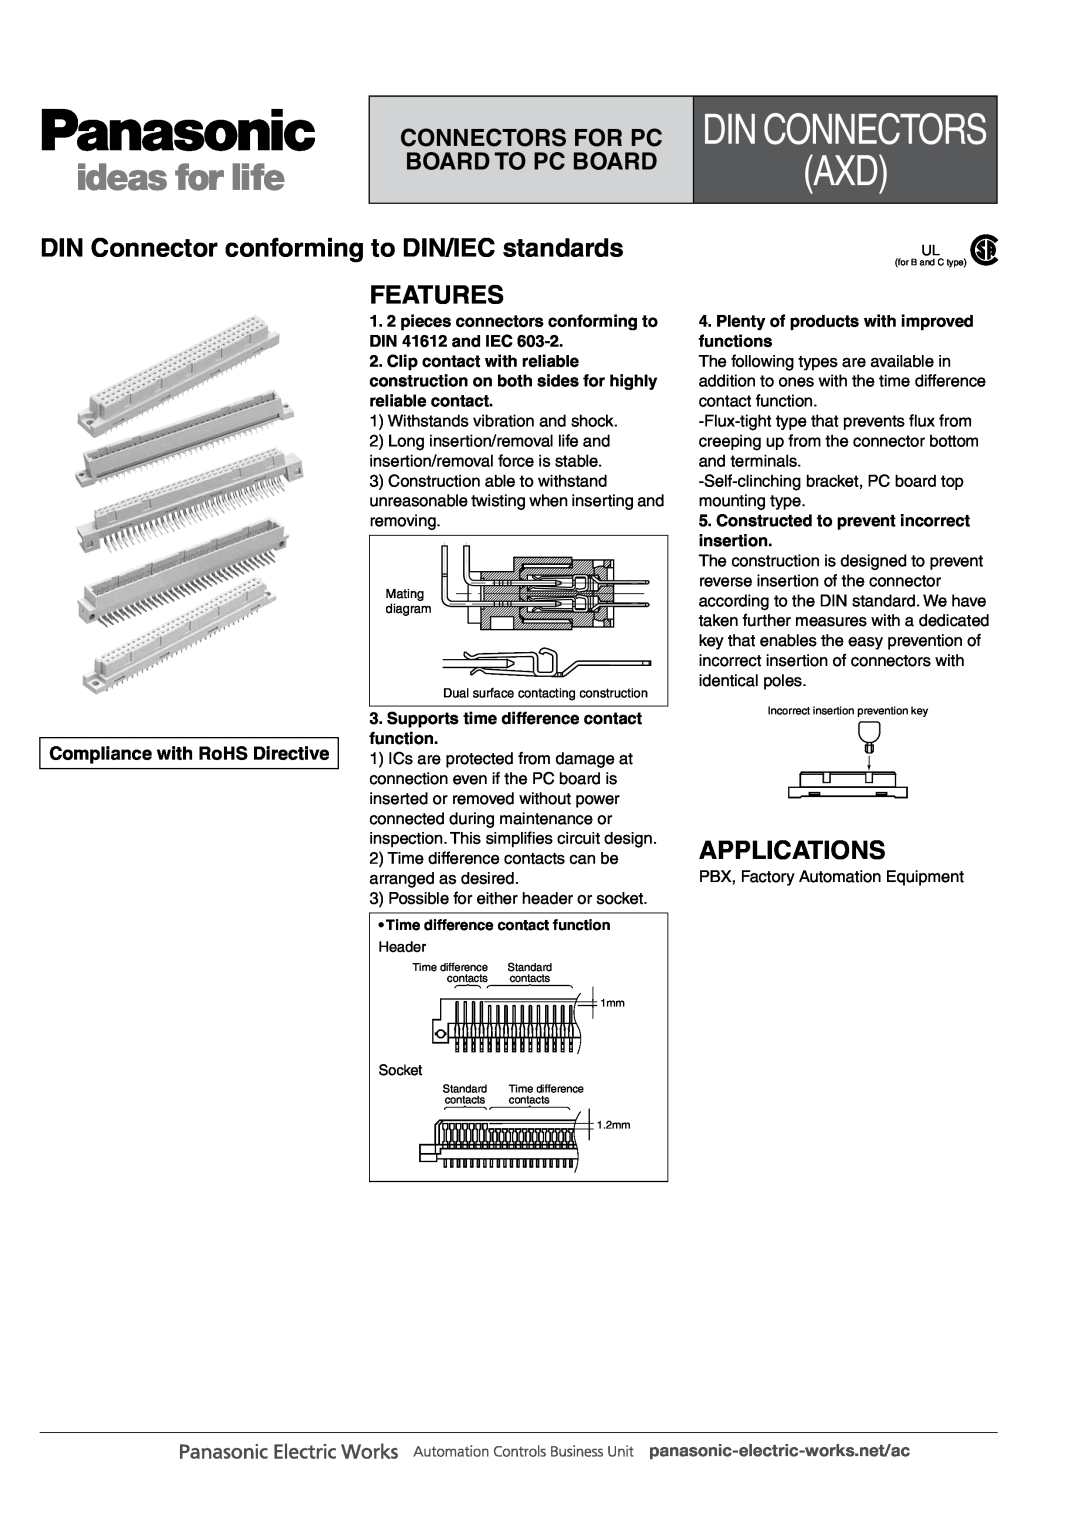 Panasonic DIN Connectors manual Din Connectors Axd, DIN Connector conforming to DIN/IEC standards FEATURES, Applications 